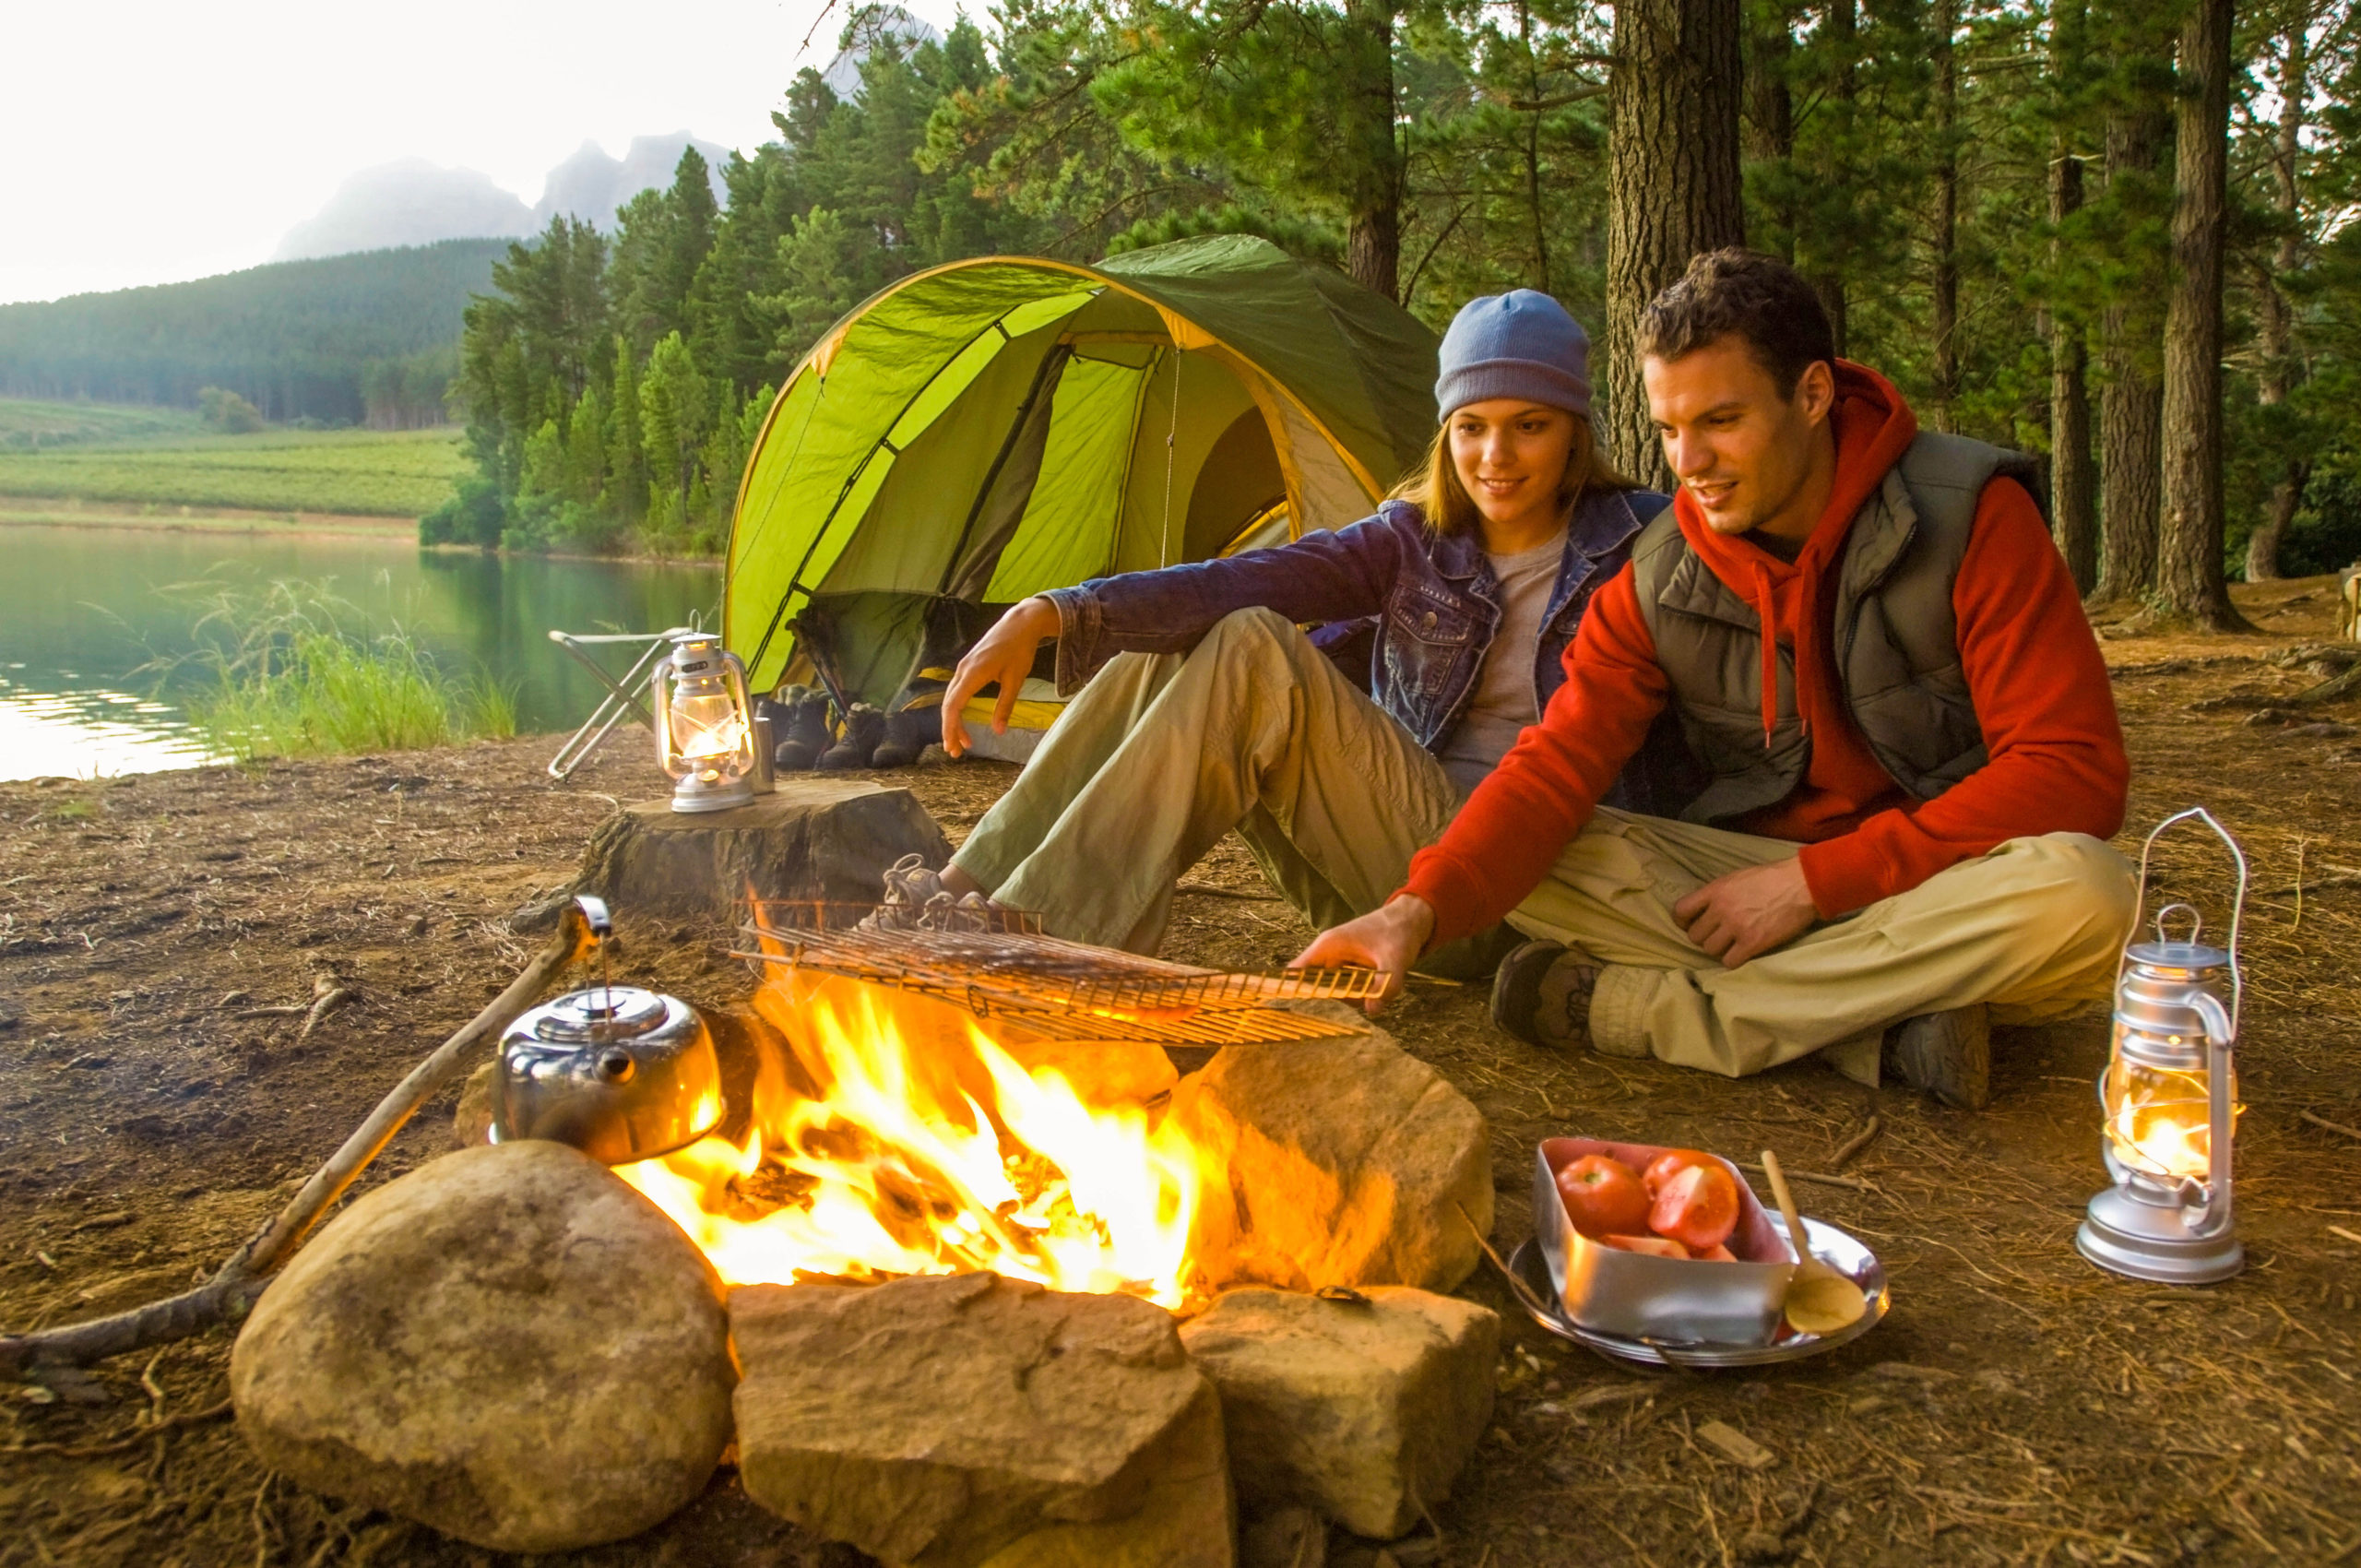 Get fired up about campfire cooking - Camping season revs up when the temperature warms. In a recent survey by Kampgrounds of America, Inc., the main reasons people say they go camping are to reconnect with nature, spend time with family and friends and reduce stress and relax.